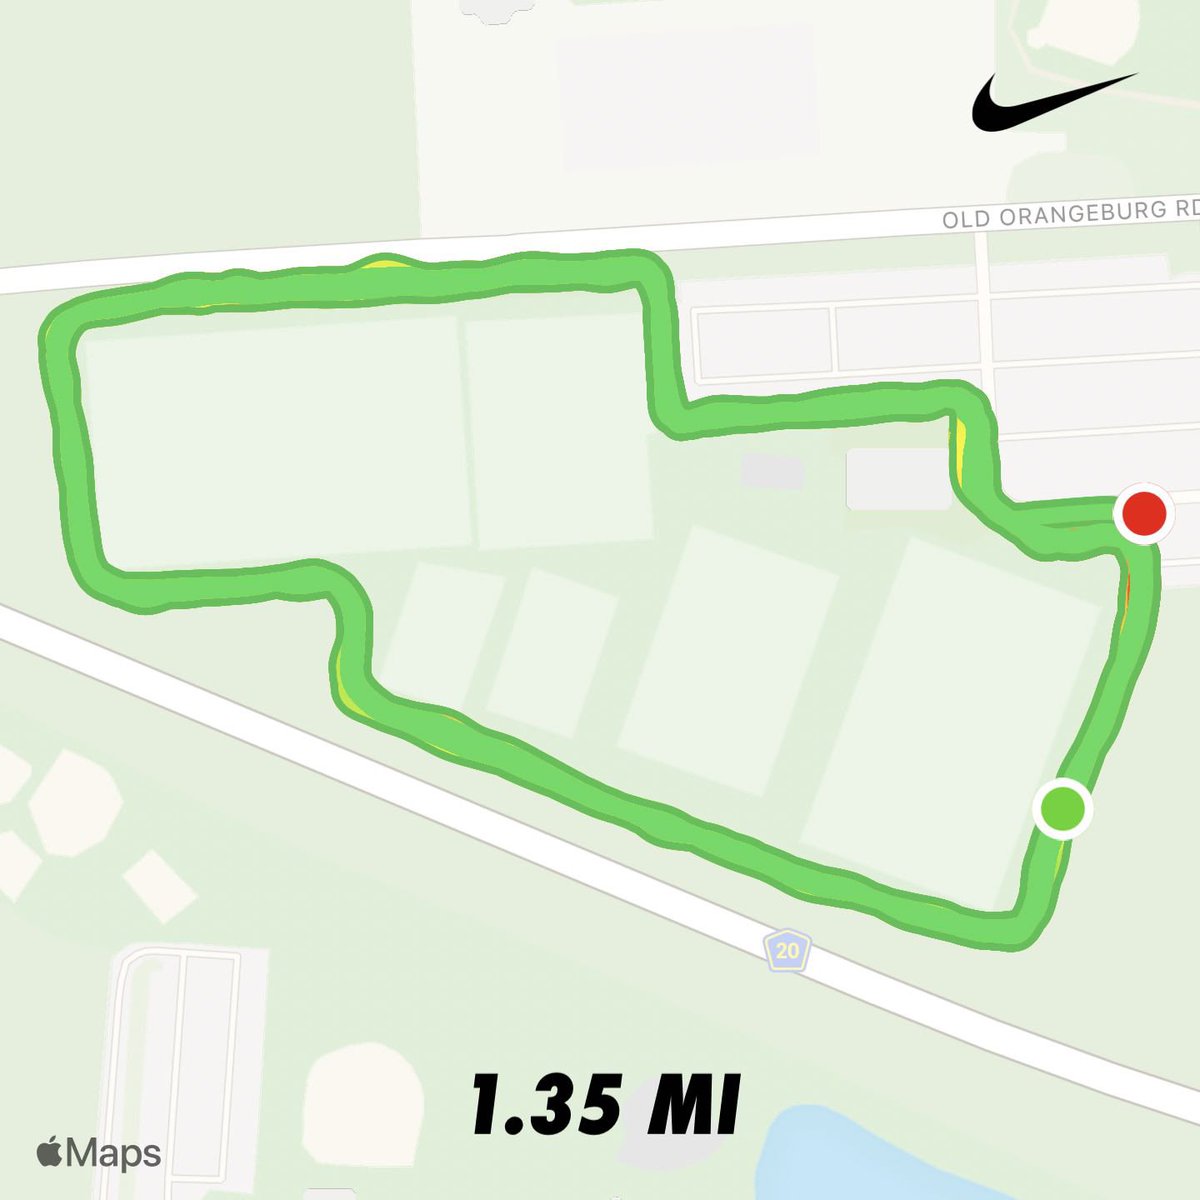 Got out for my first speed run with #nikerunclub felt good and when I saw my pace afterwards, I was happy, I could have sworn it was much slower. Another day in.  #running #TeamMullins gotta keep it going now.